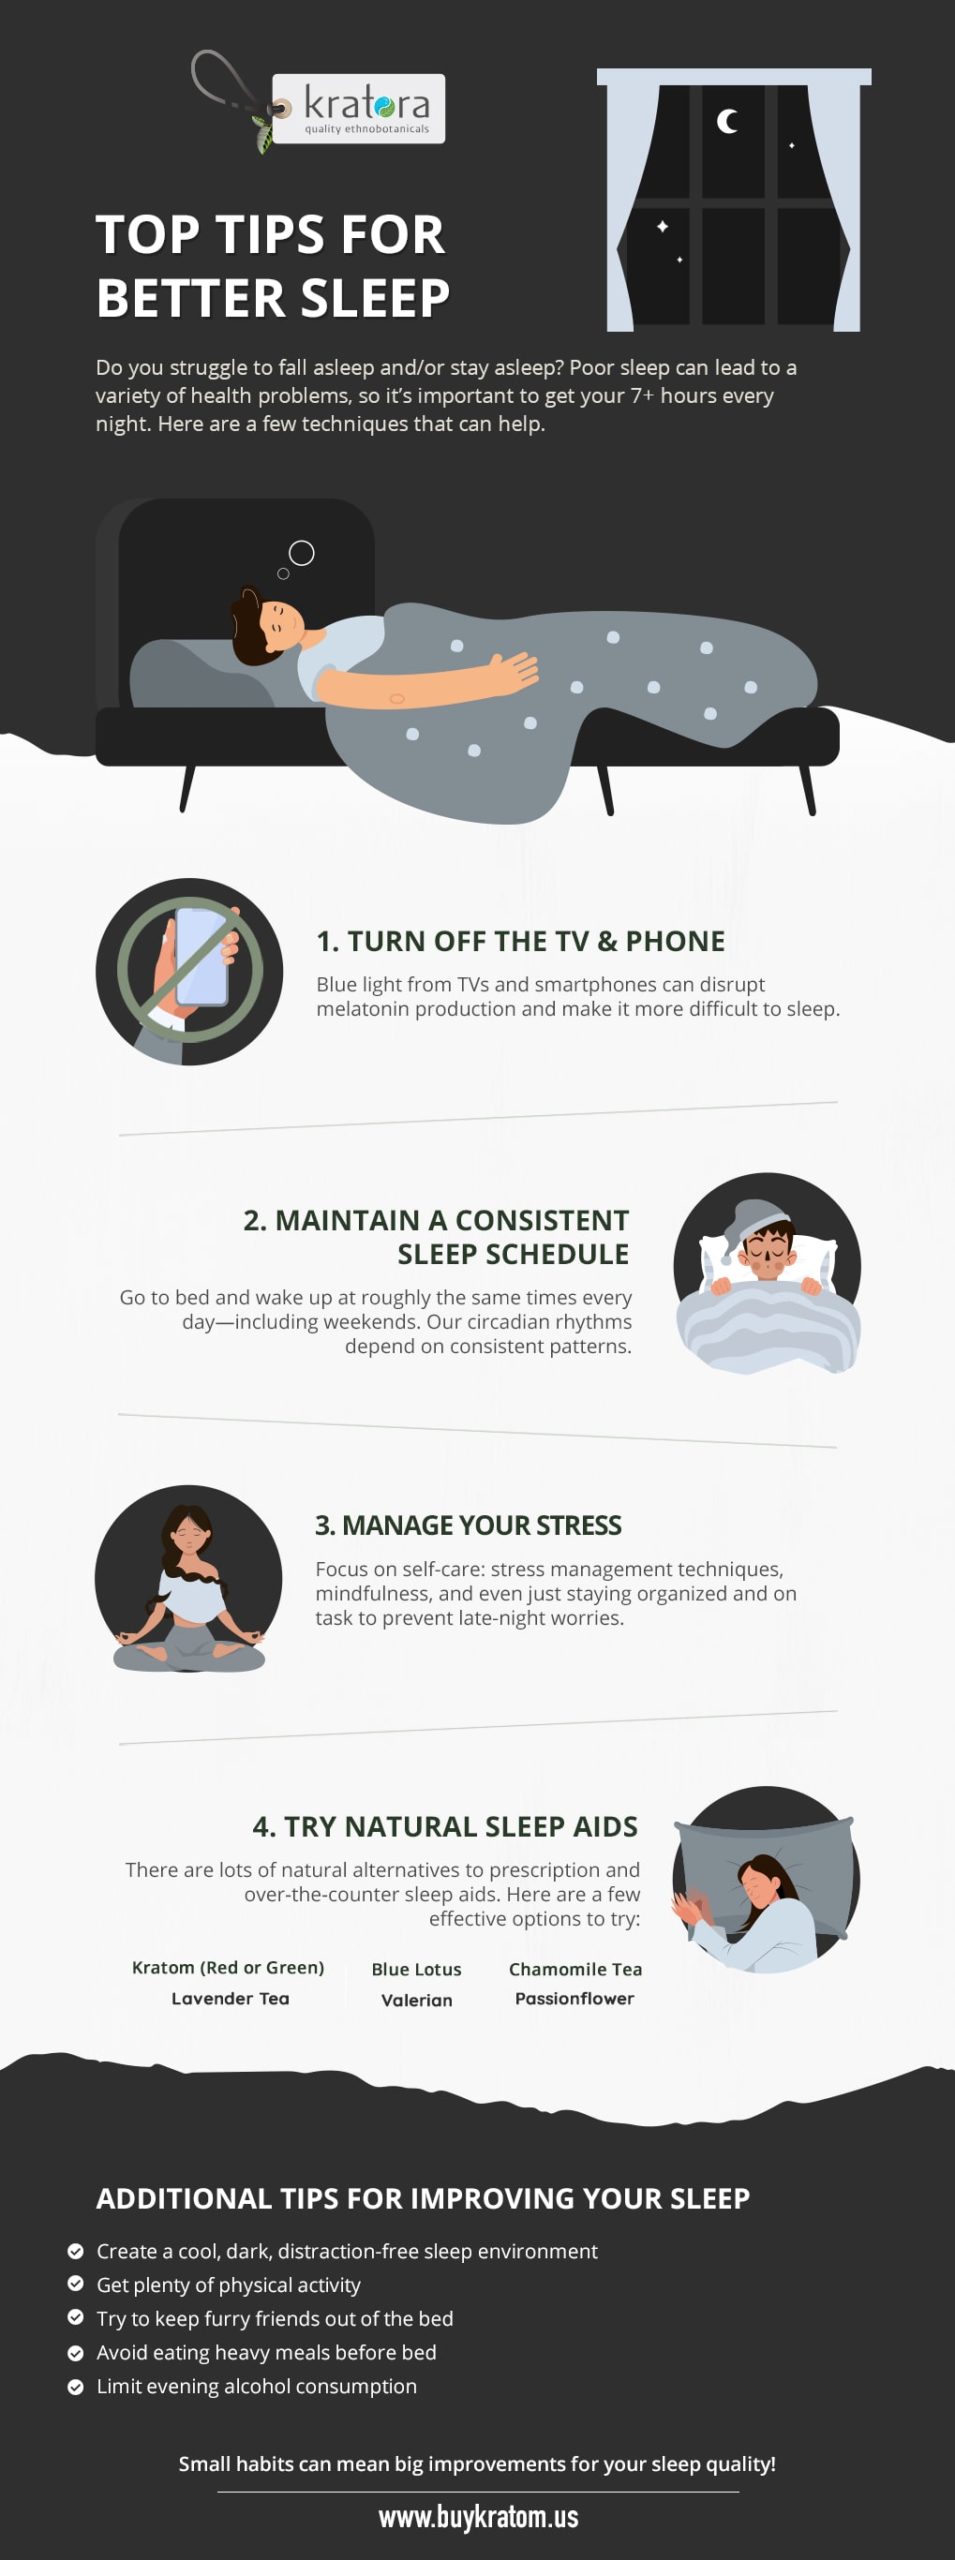 Our Top Tips For Better Sleep